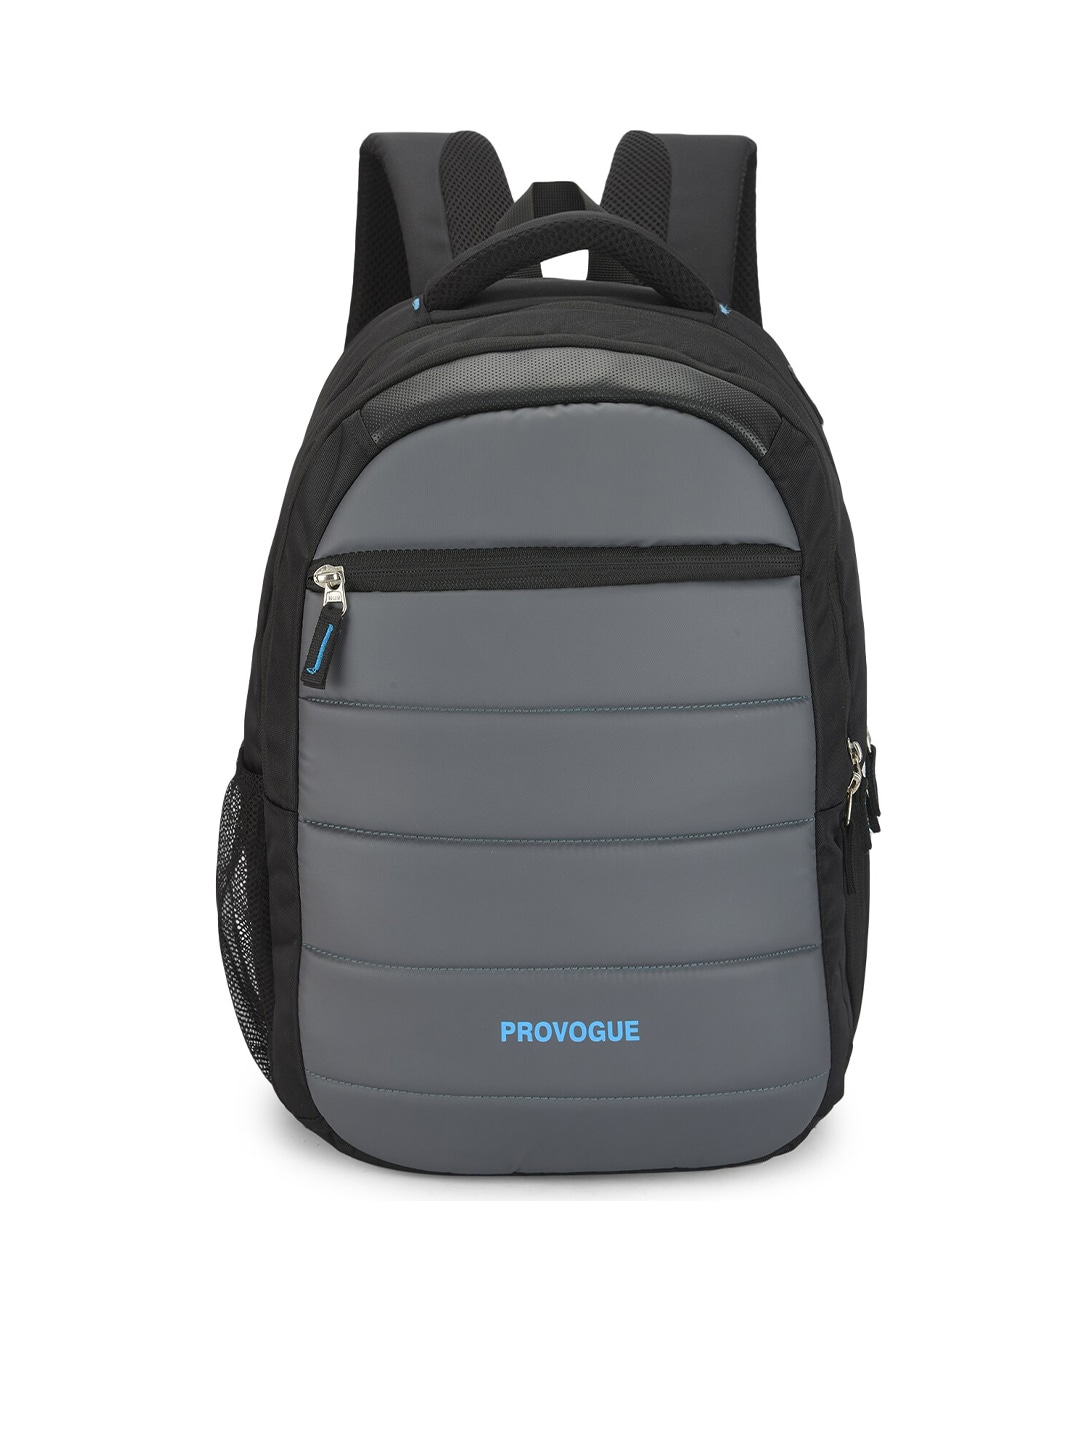 Provogue Black & Grey Backpack with Reflective Strip & Rain Cover Price in India